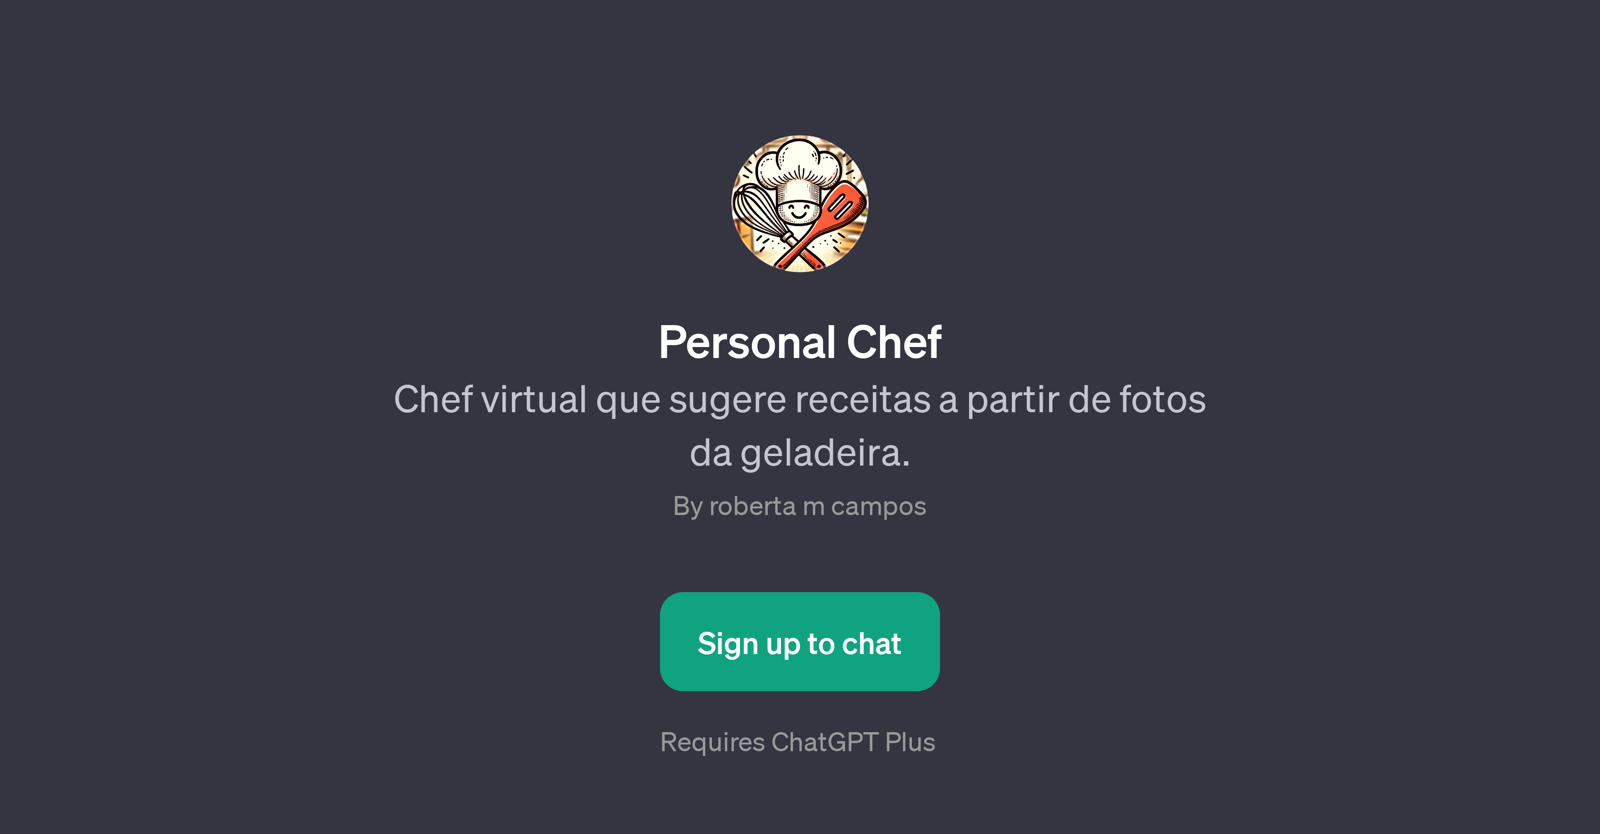 Personal Chef website